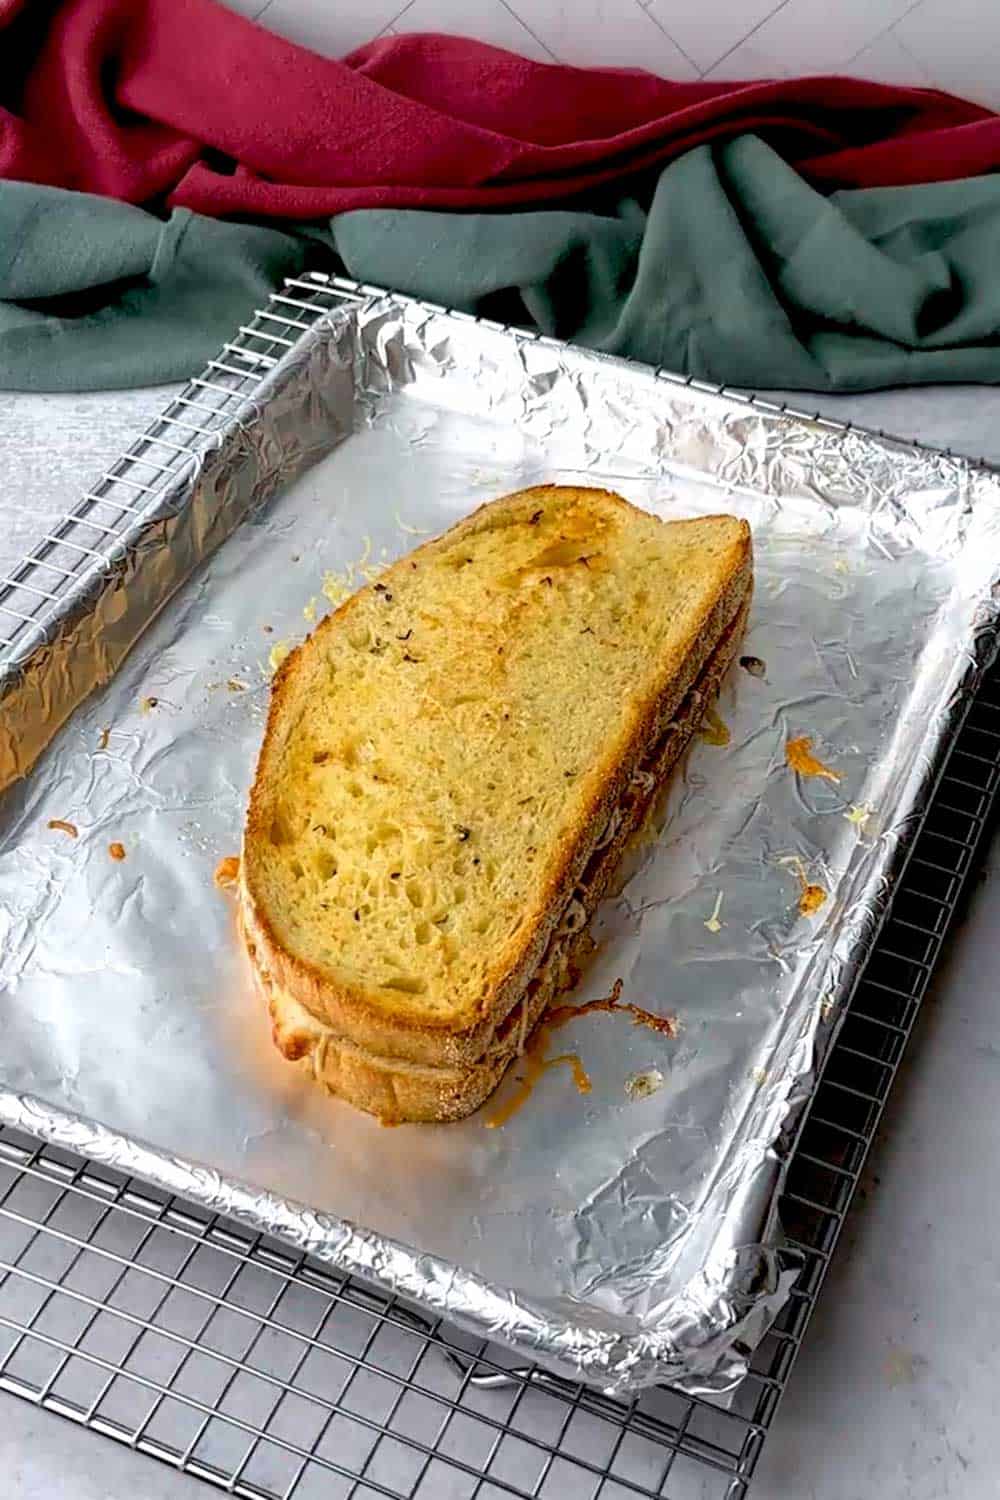 Garlic bread grilled cheese sandwich out of the oven after five minutes.